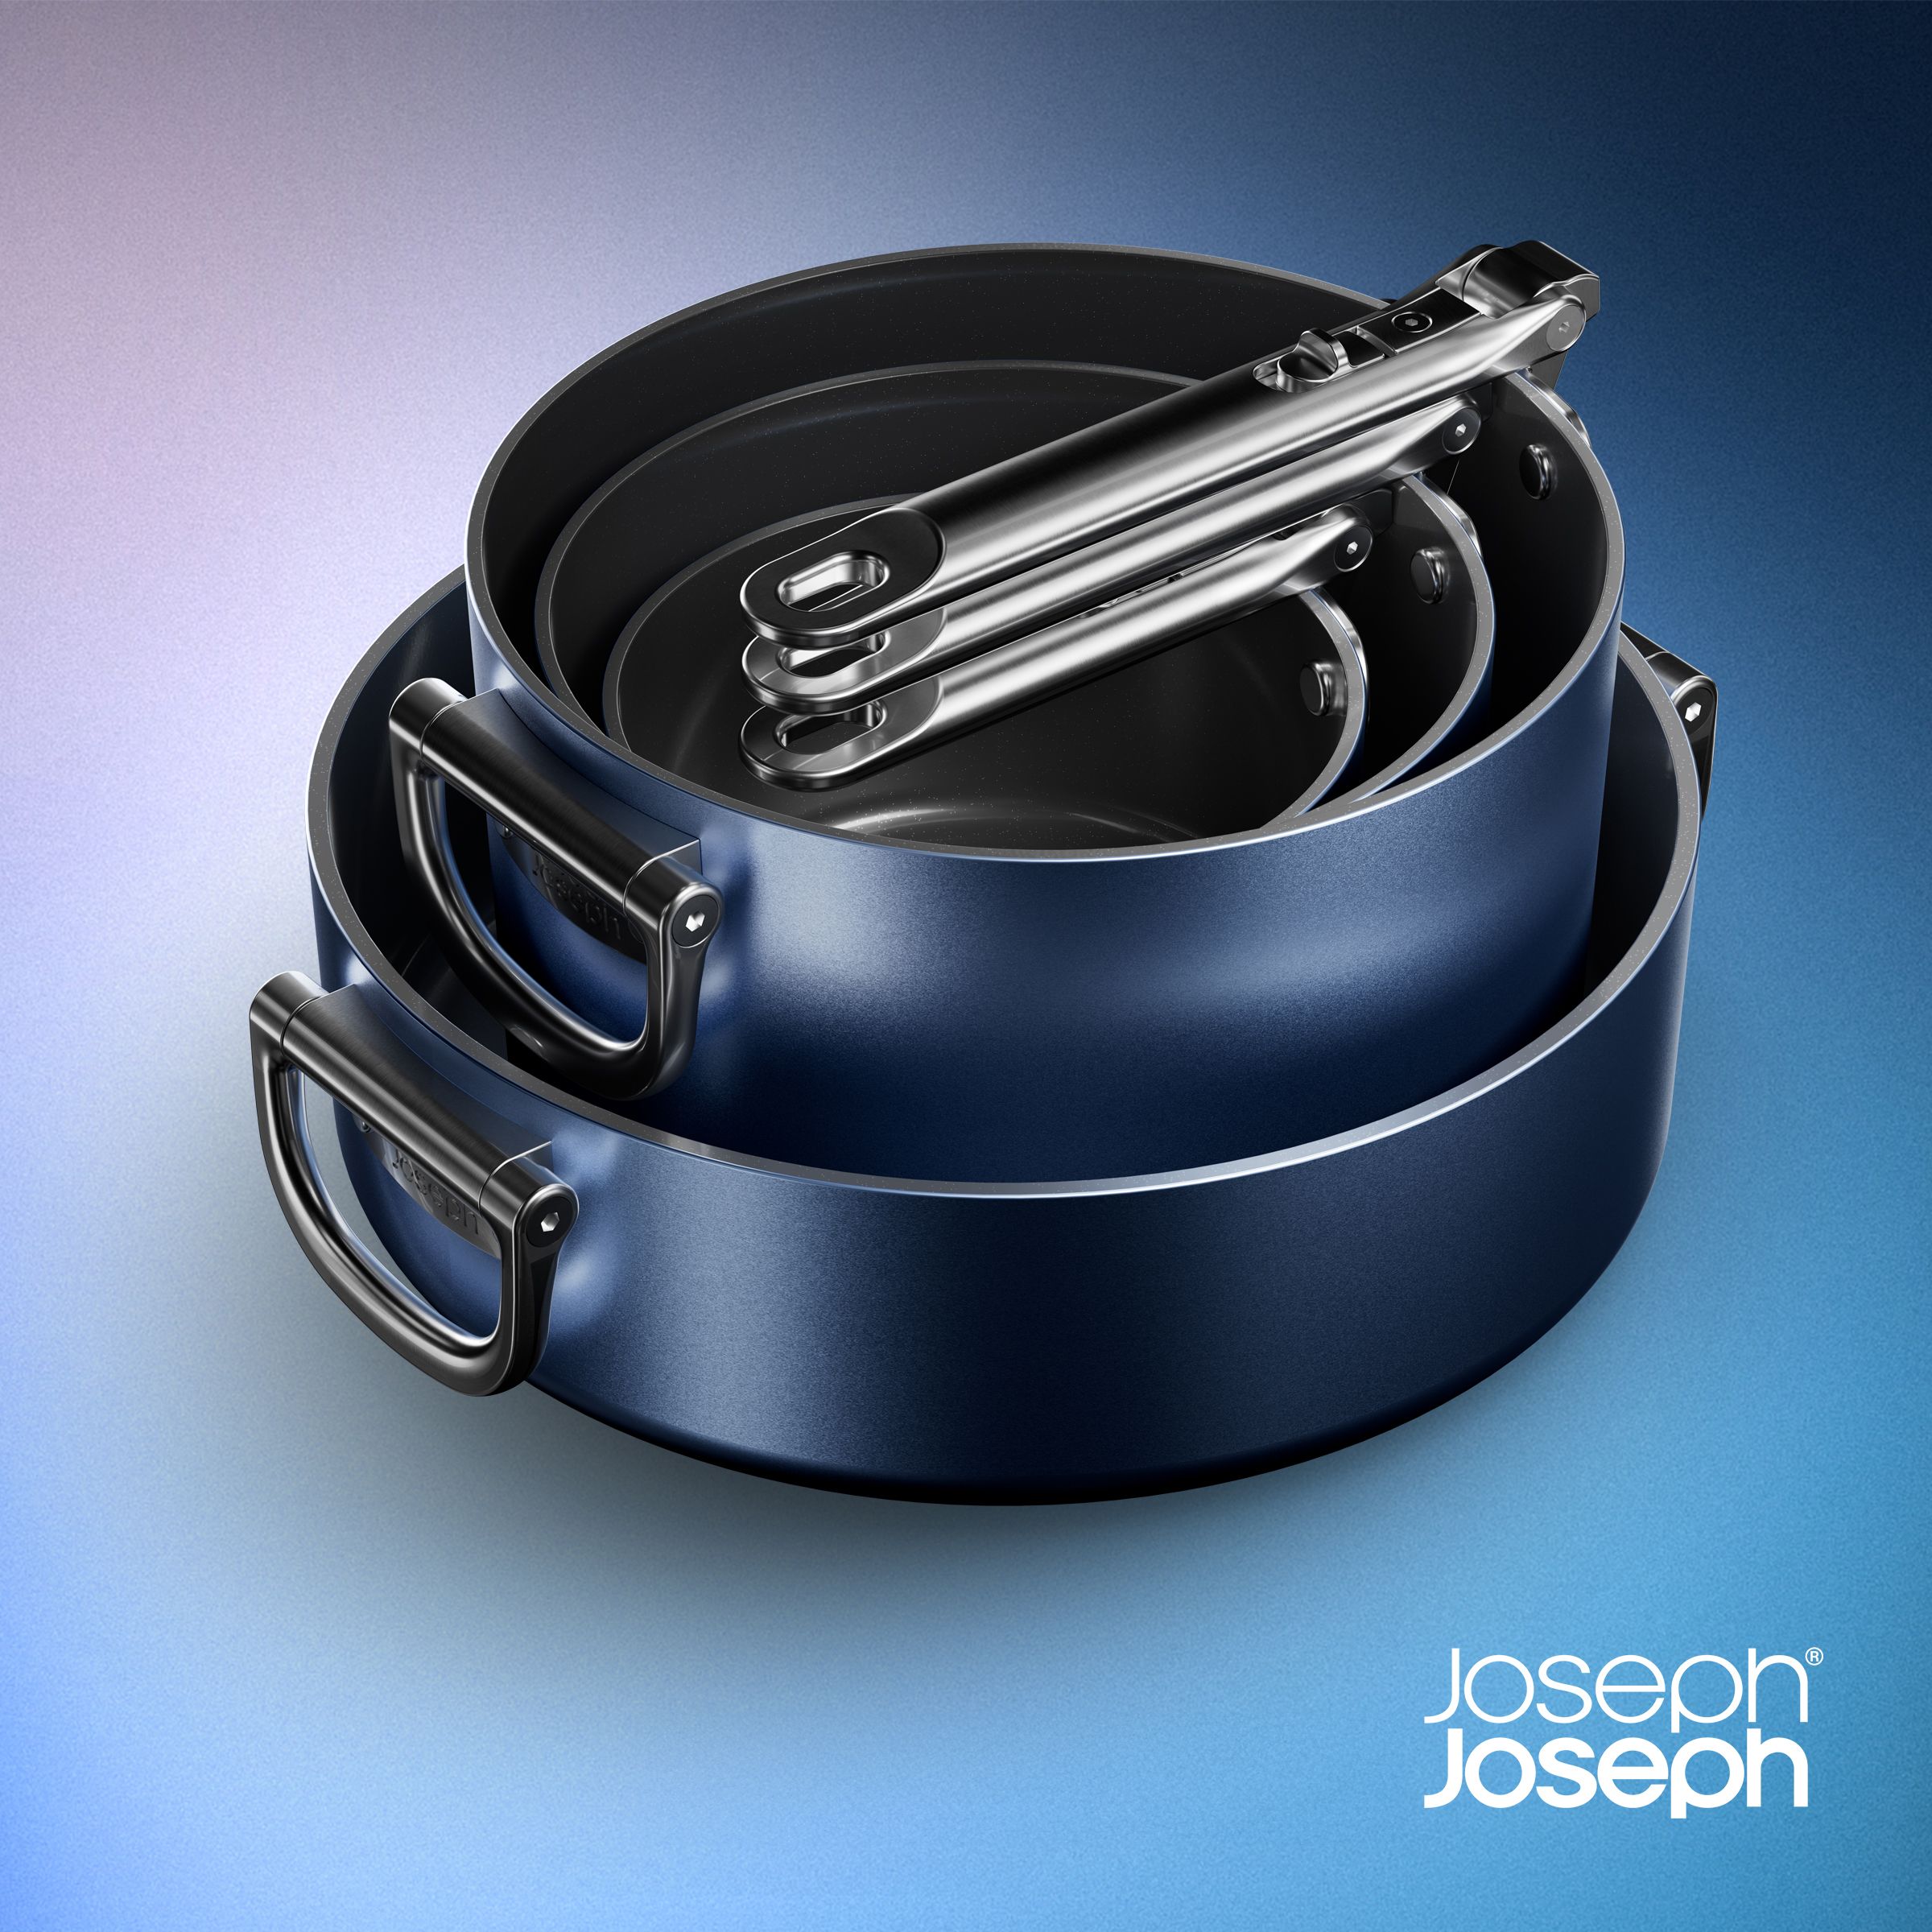 joseph joseph products on a glittery background - Space cookware has landed